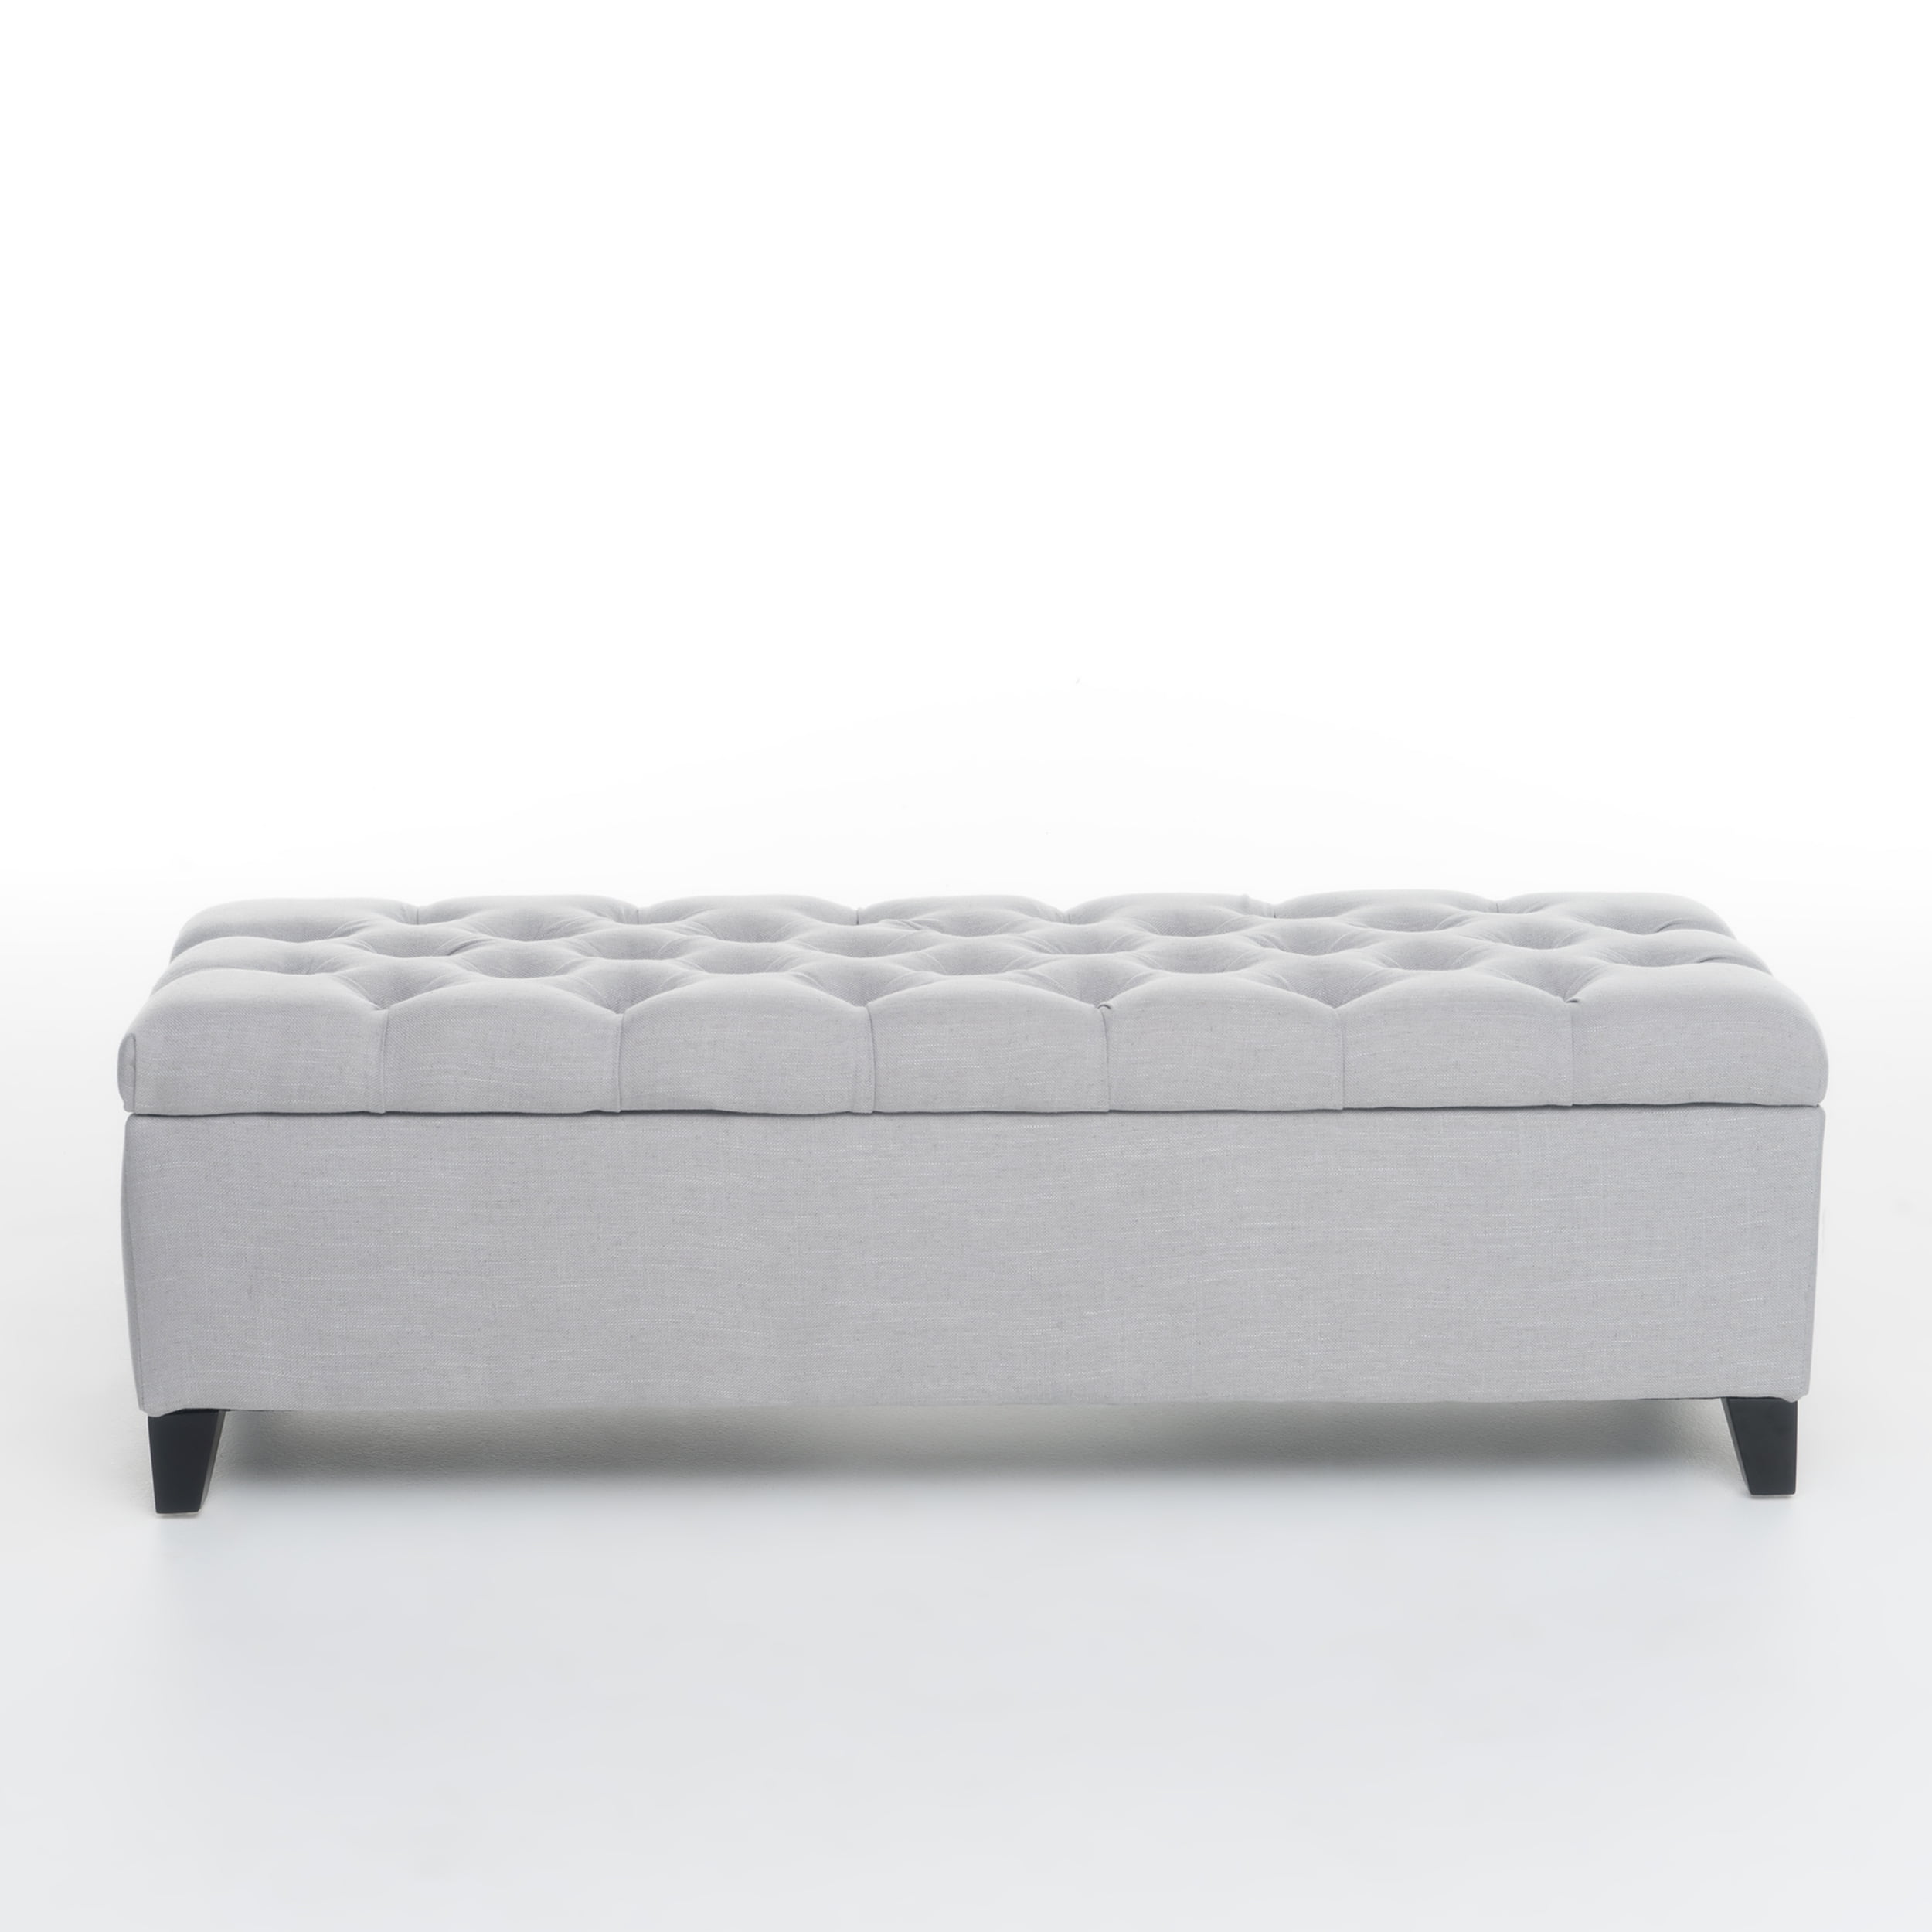 Chantal Contemporary On Tufted, Patterned Storage Ottoman Bench